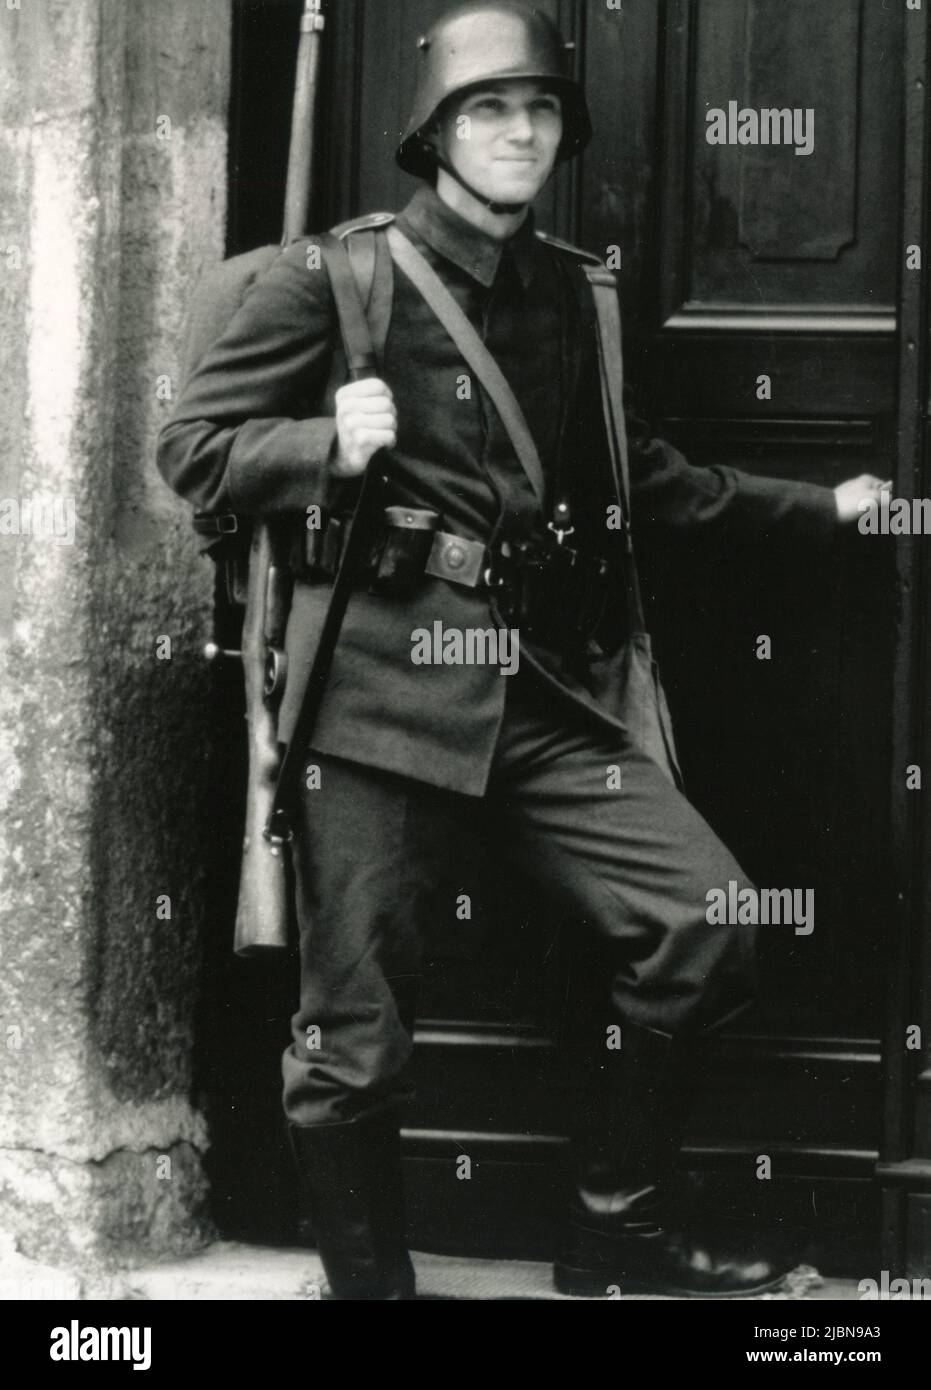 American actor Richard Thomas in the movie All Quiet on the Western Front, USA 1979 Stock Photo